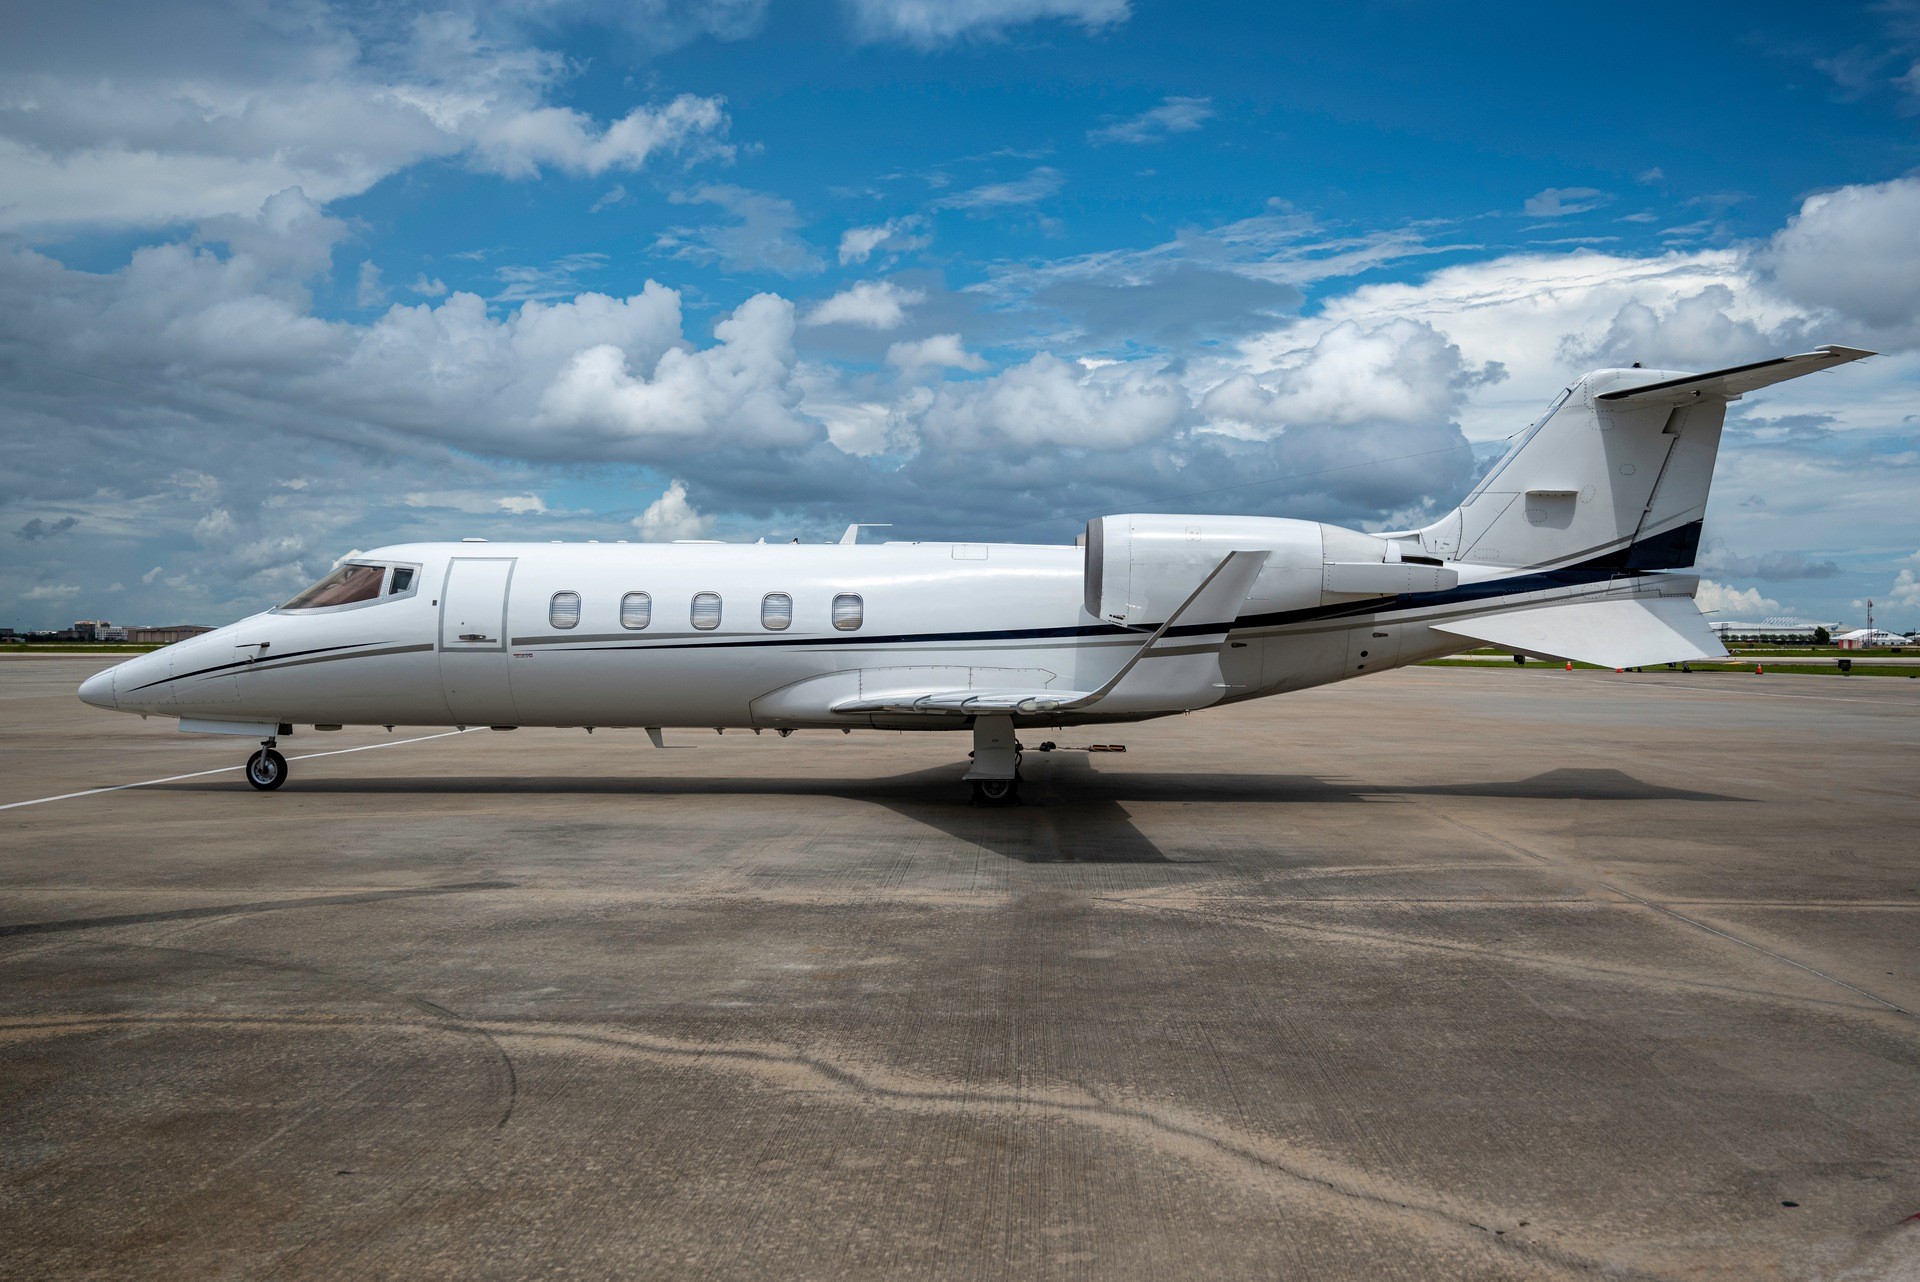 Charter a Private Jet to Music Tours